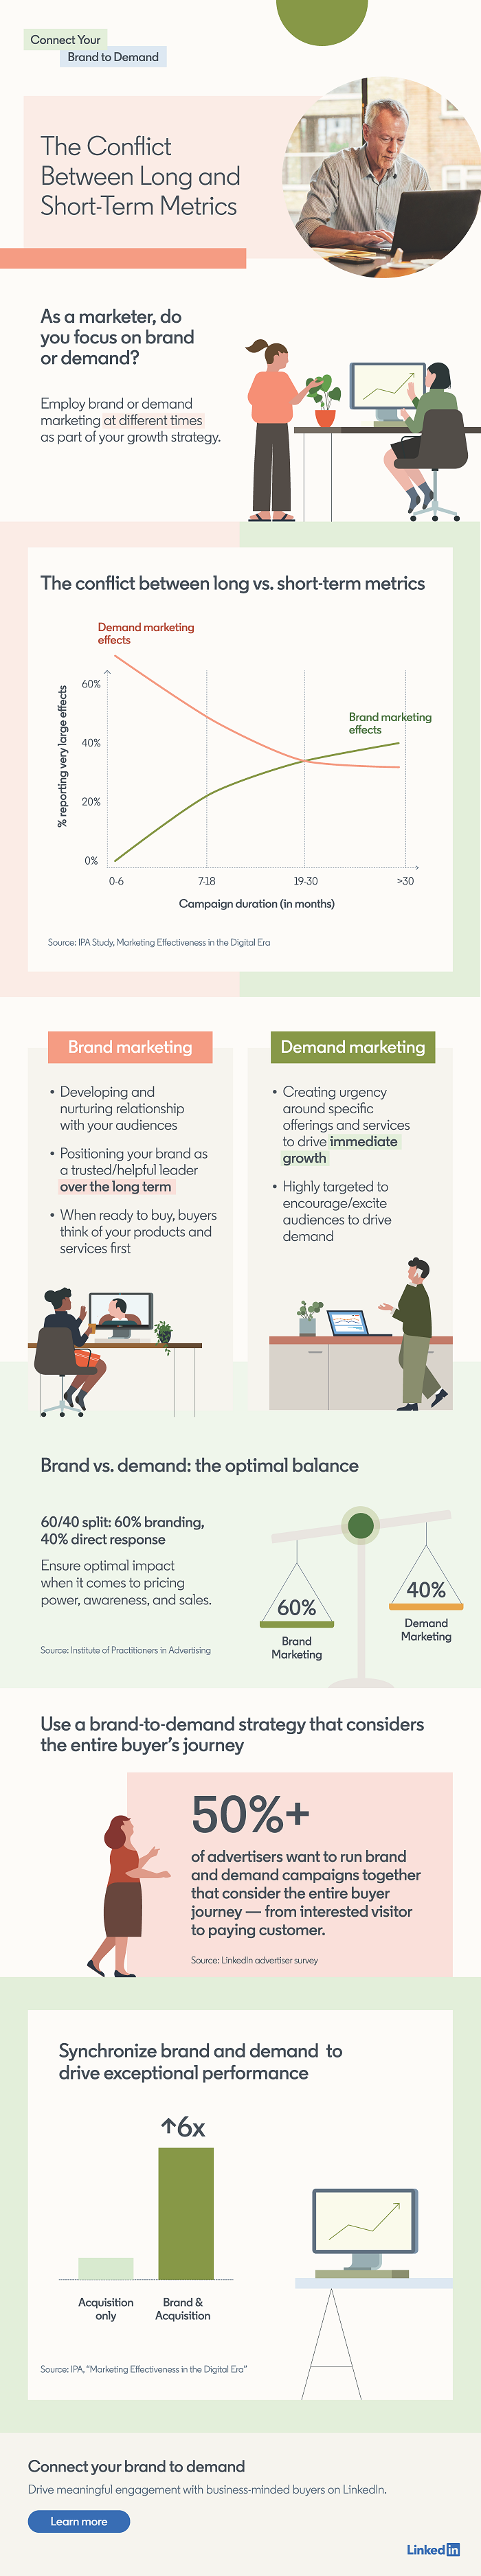 linkedin shares new insights on the benefits of a combined brand and demand approach infographic